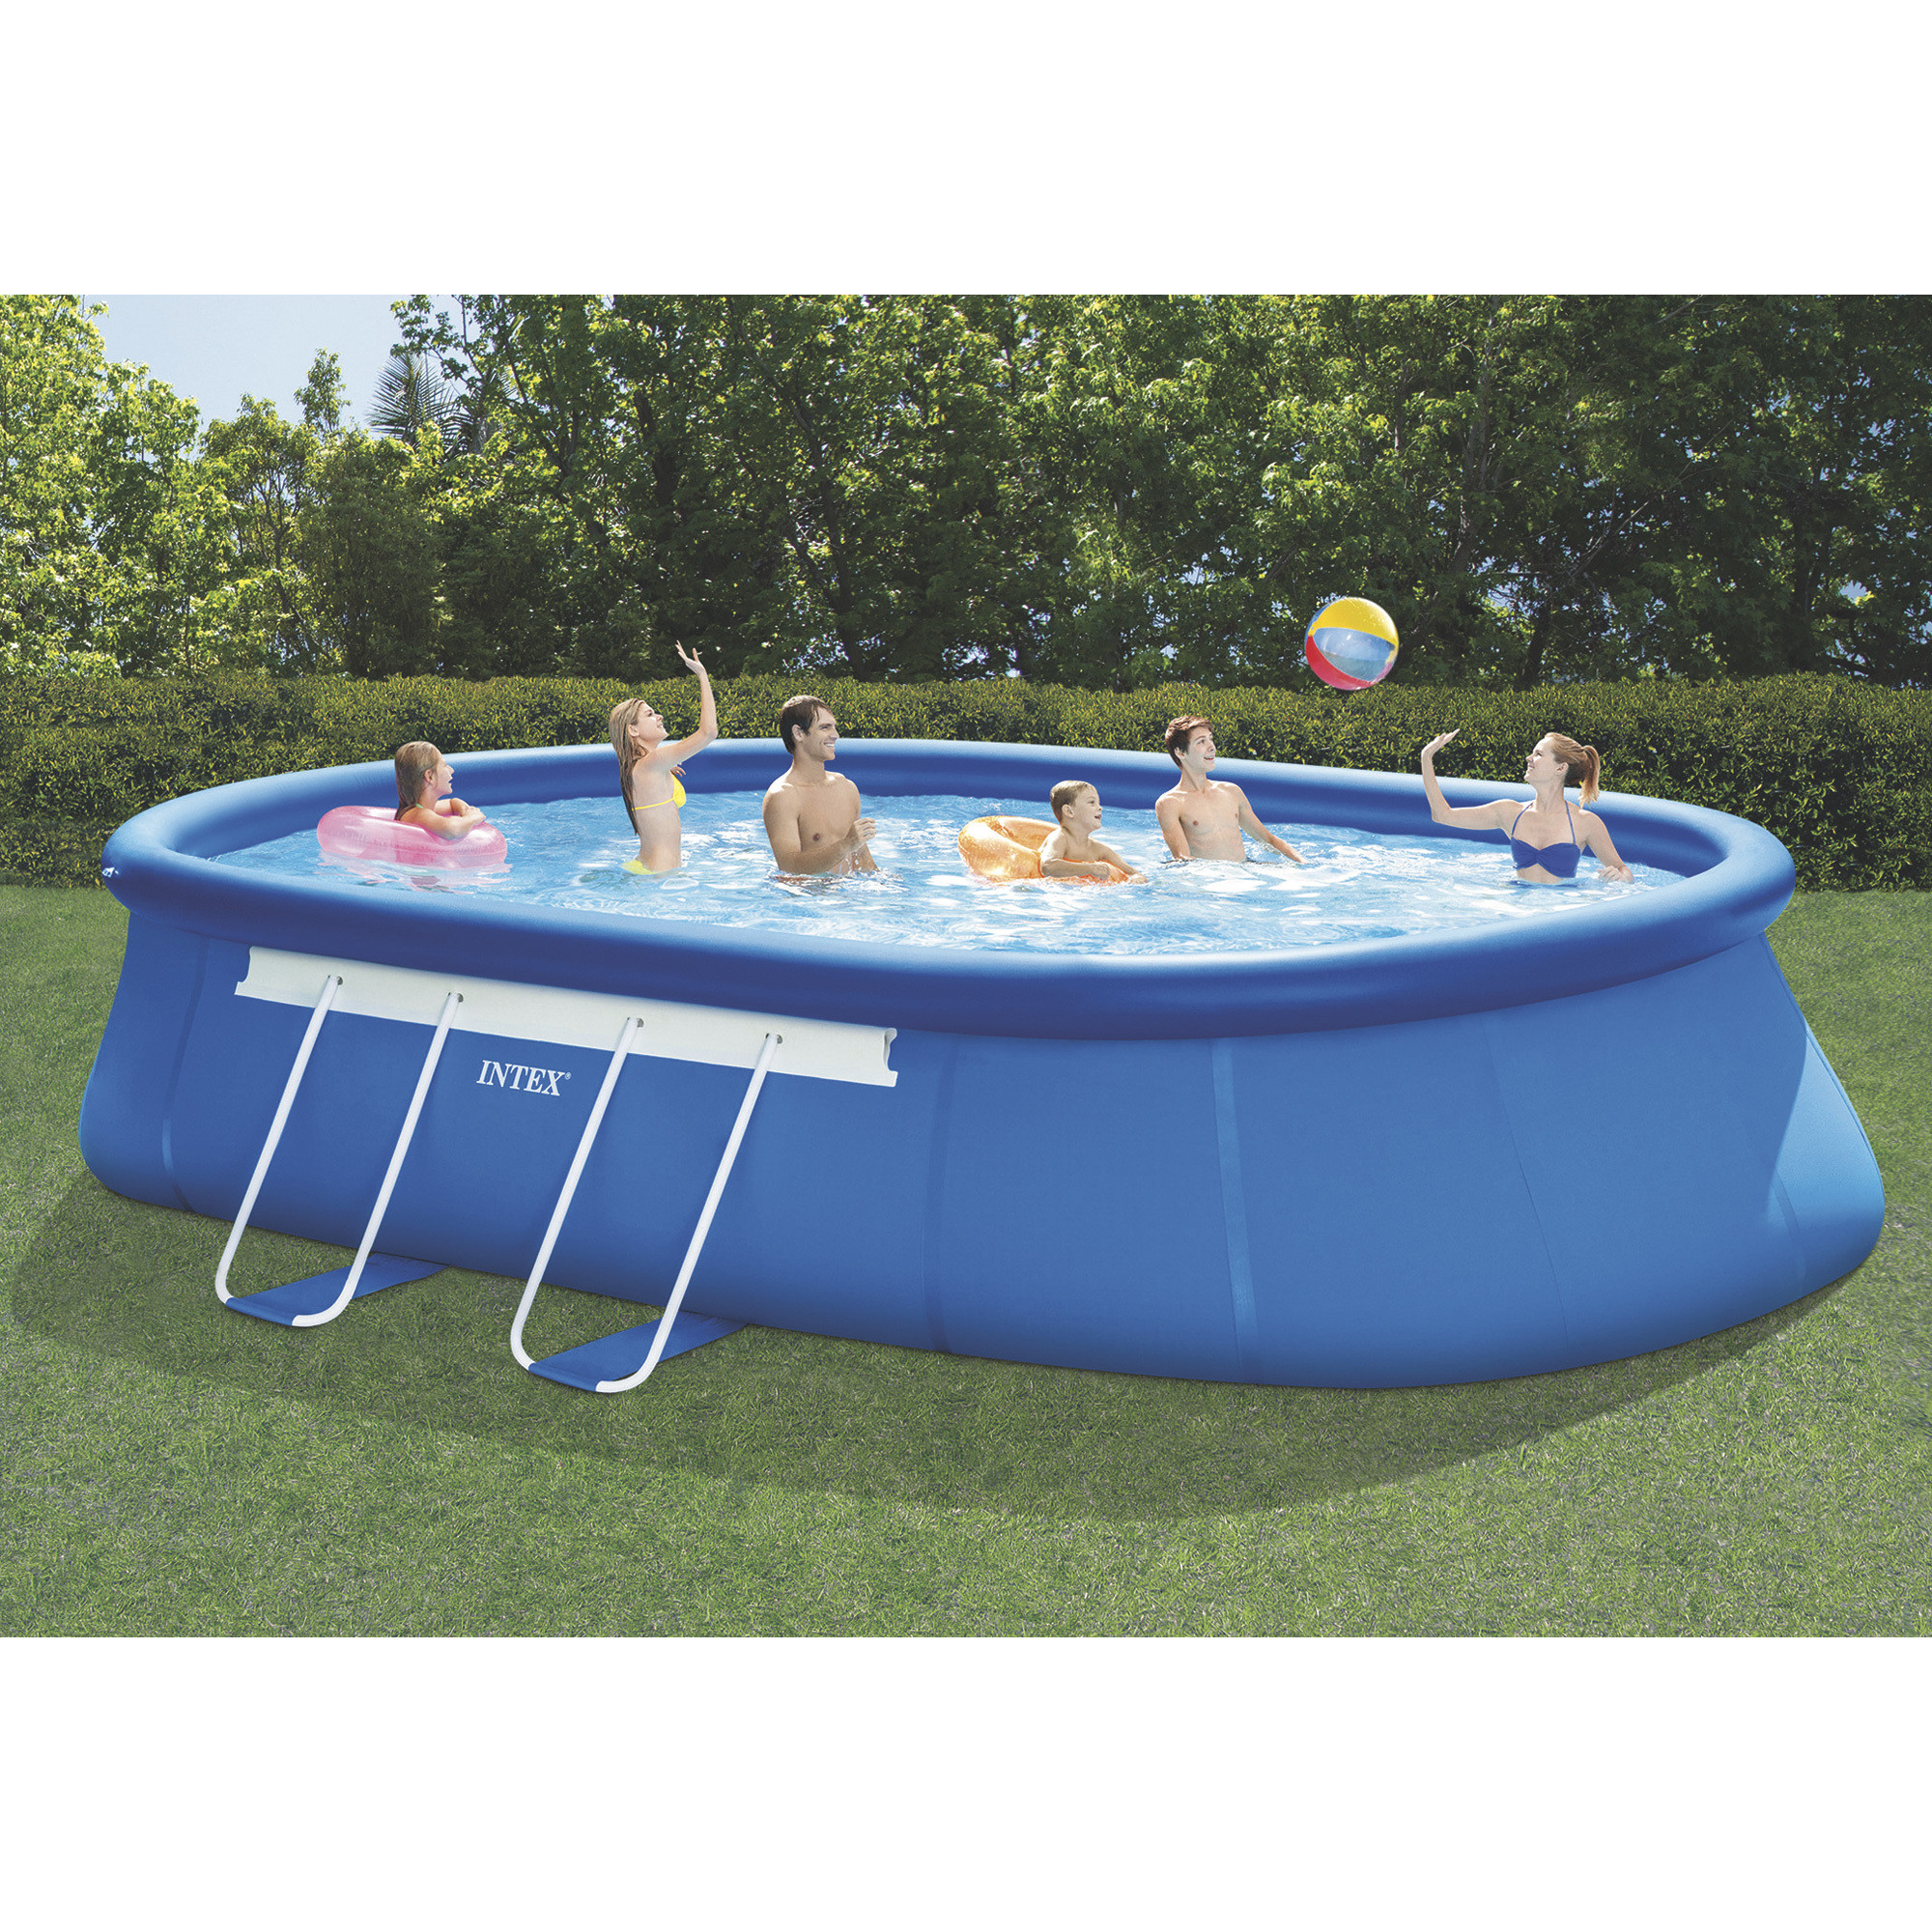 20 Ft Above Ground Pool
 Intex Oval Frame Ground Swimming Pool — 20ft x 12ft